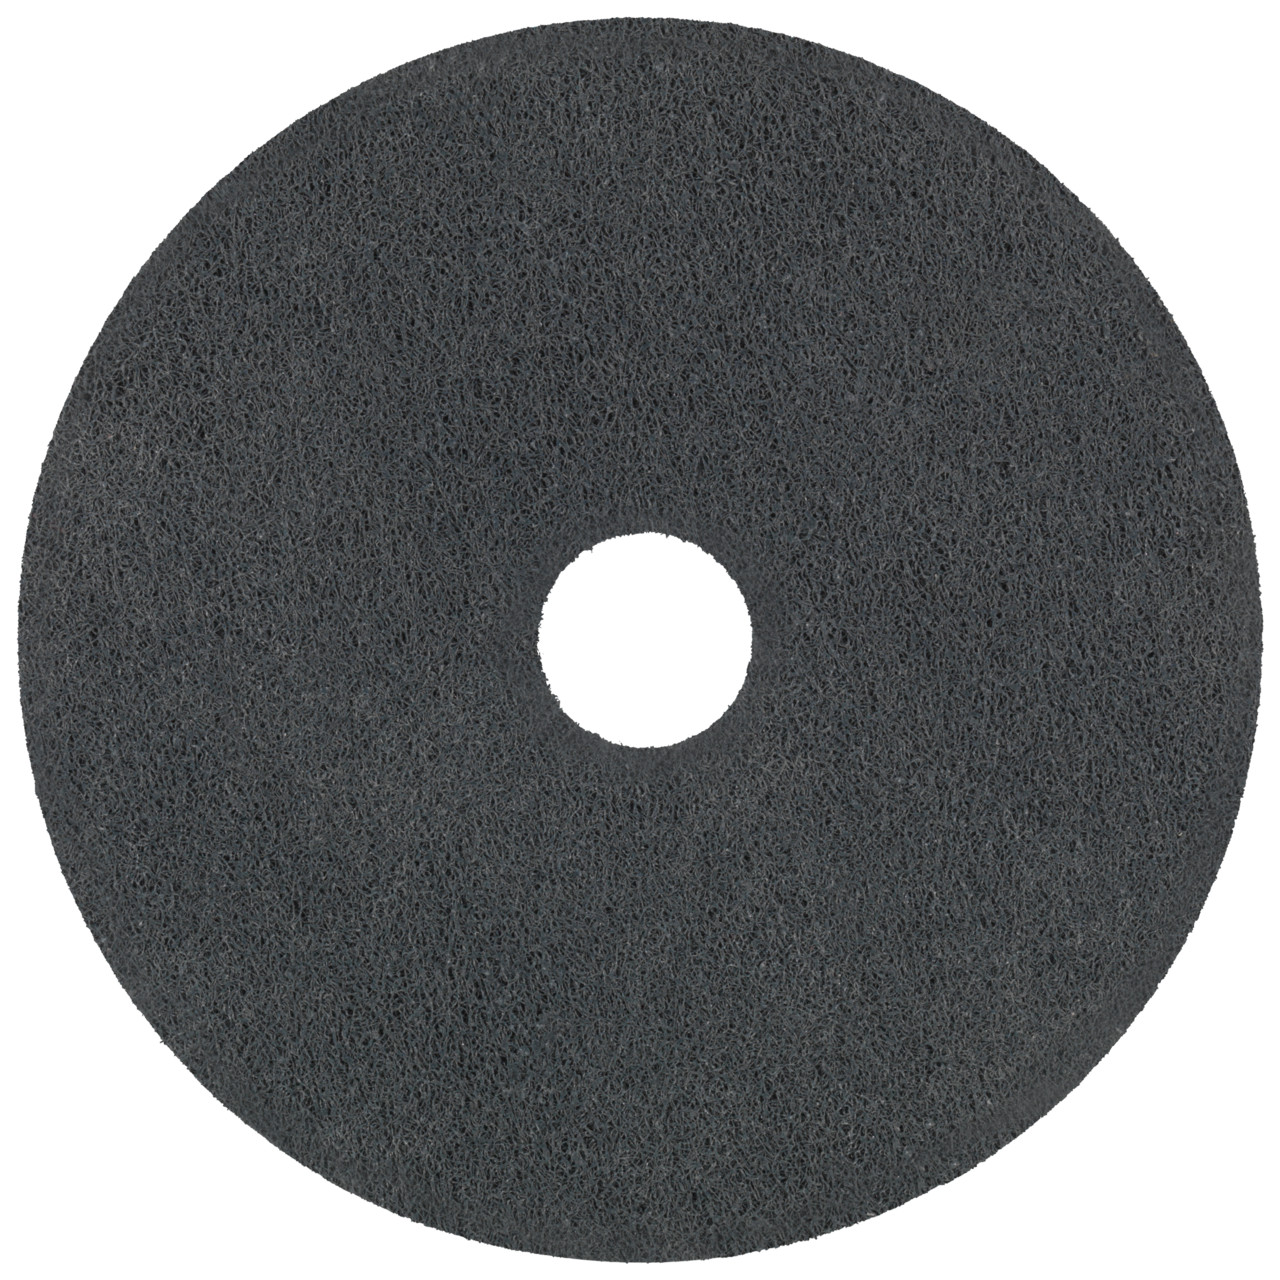 Tyrolit Pressed compact discs DxDxH 152x6x25.4 Universally applicable, 8 A GROB, shape: 1, Art. 34190279